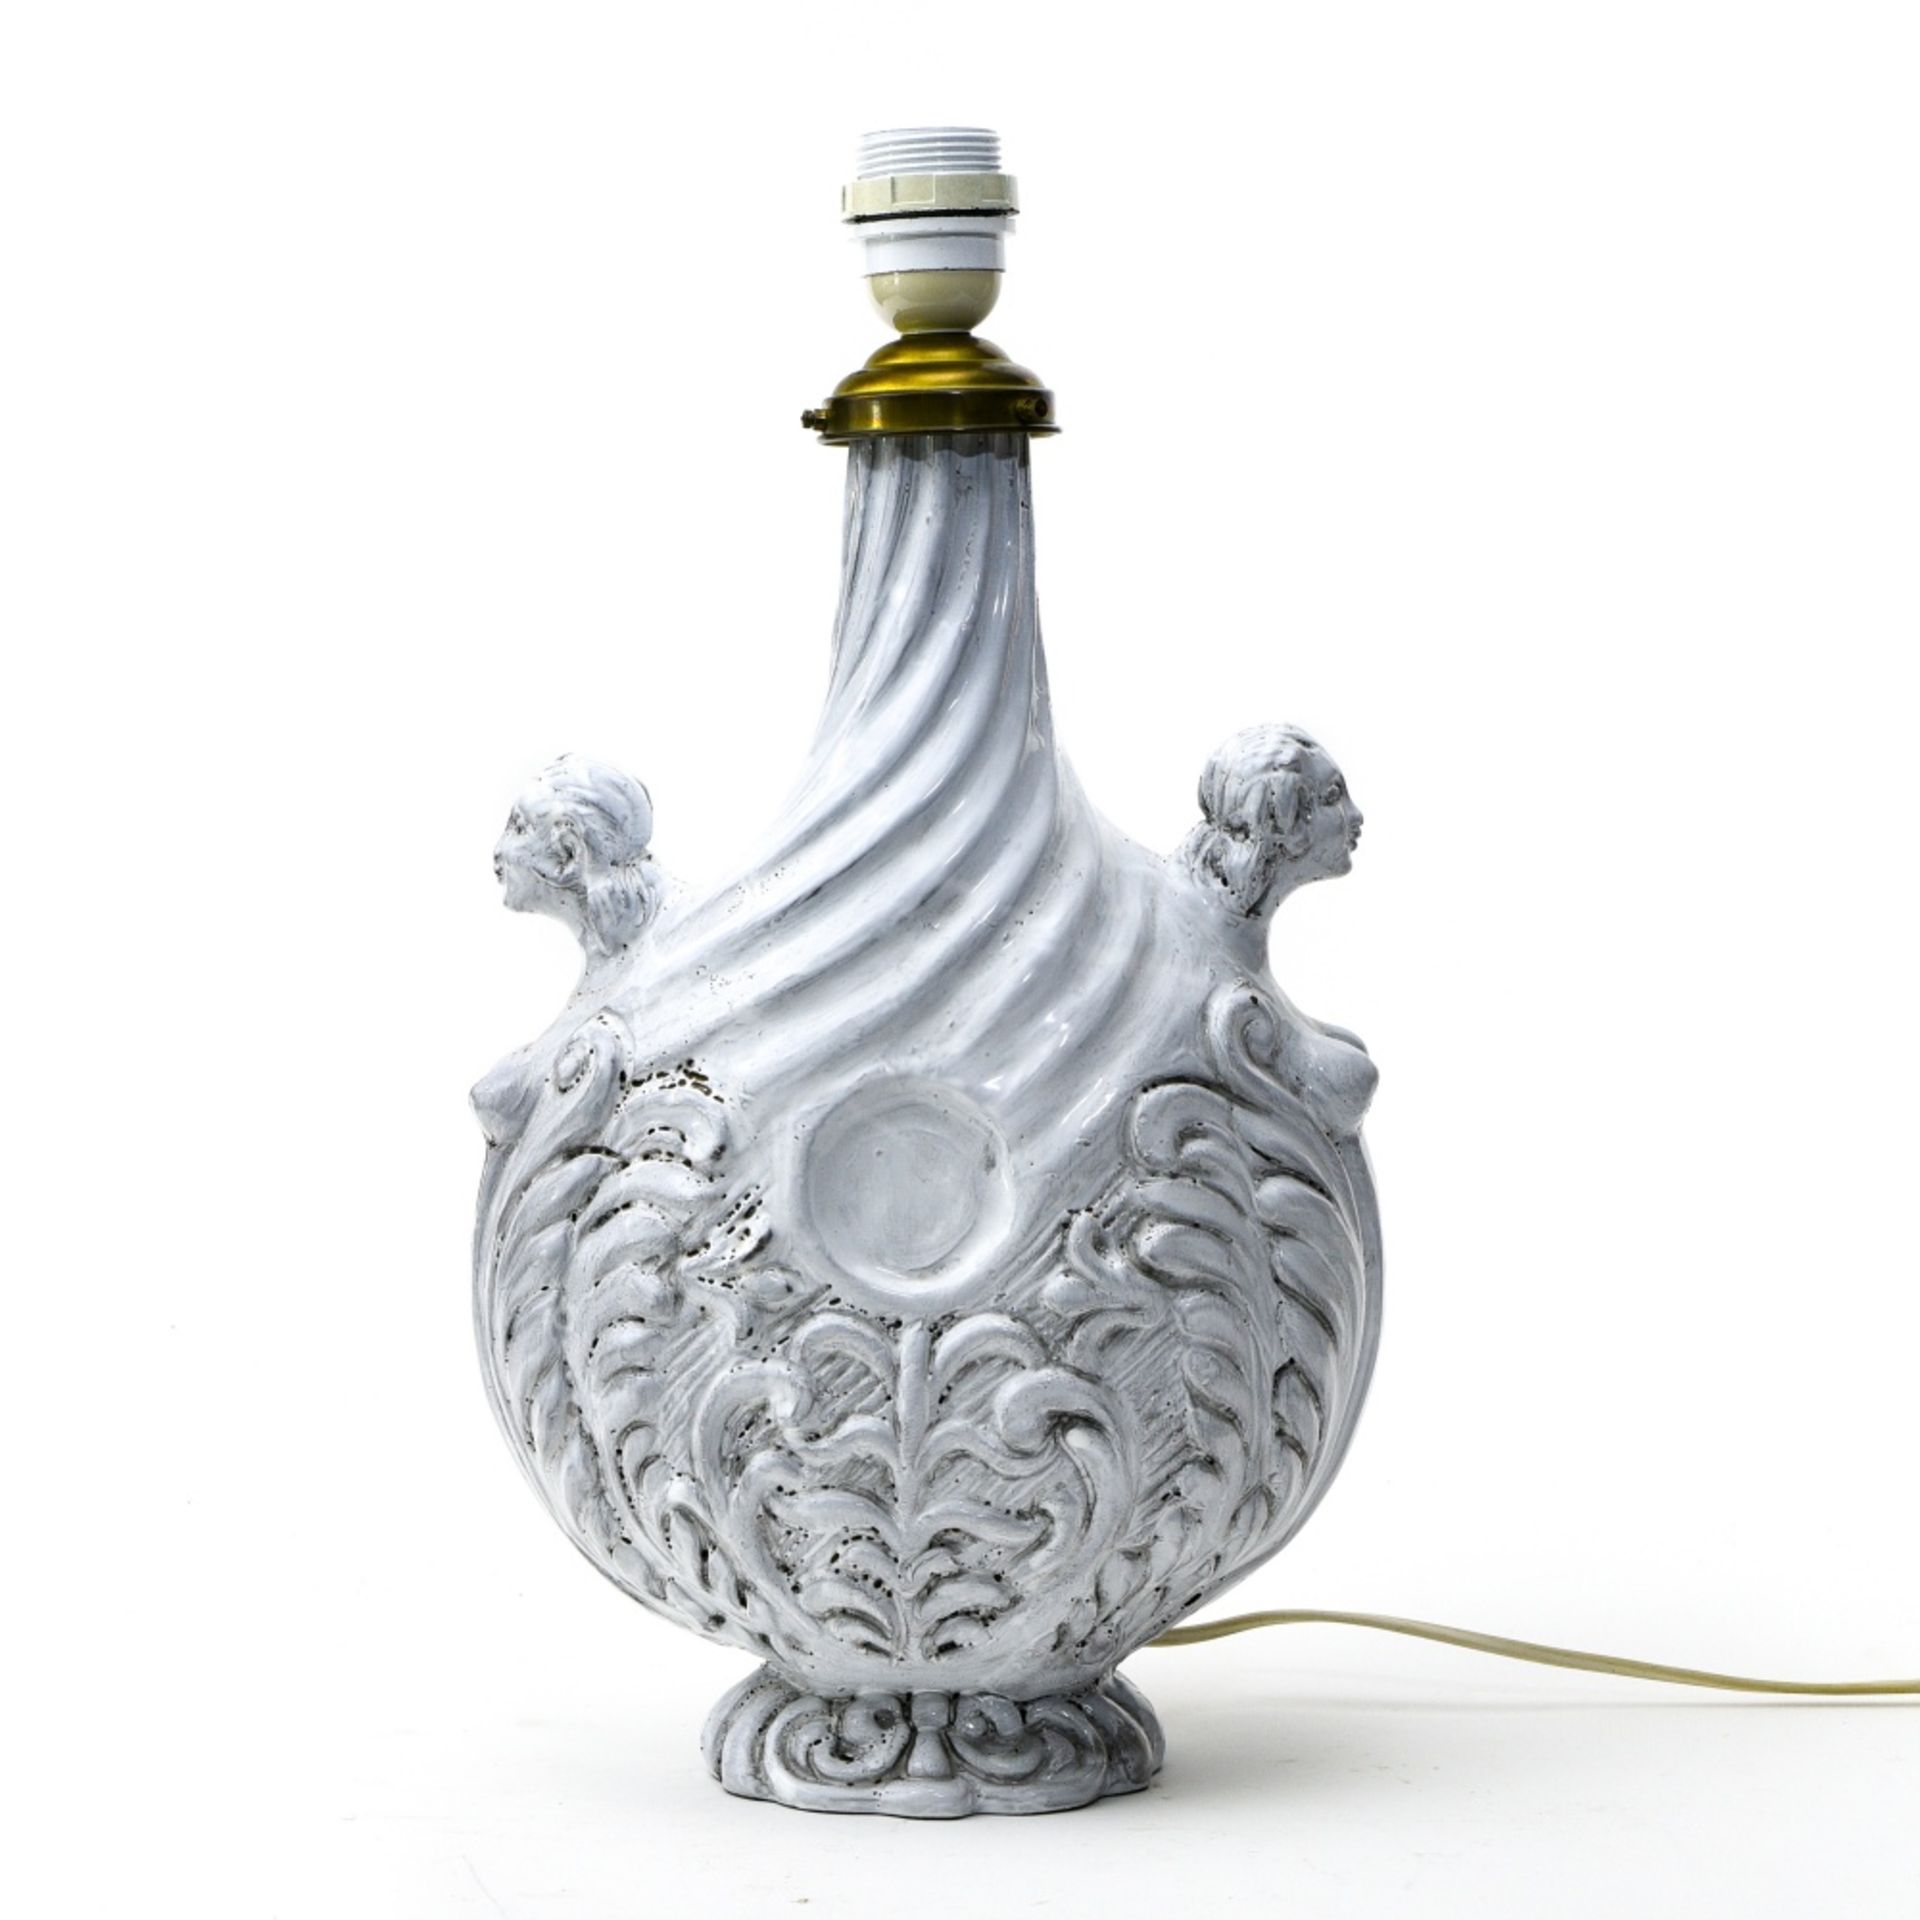 Probably Italian 1960's work Vase converted to a lamp, White-enamelled ceramic, with haut relief